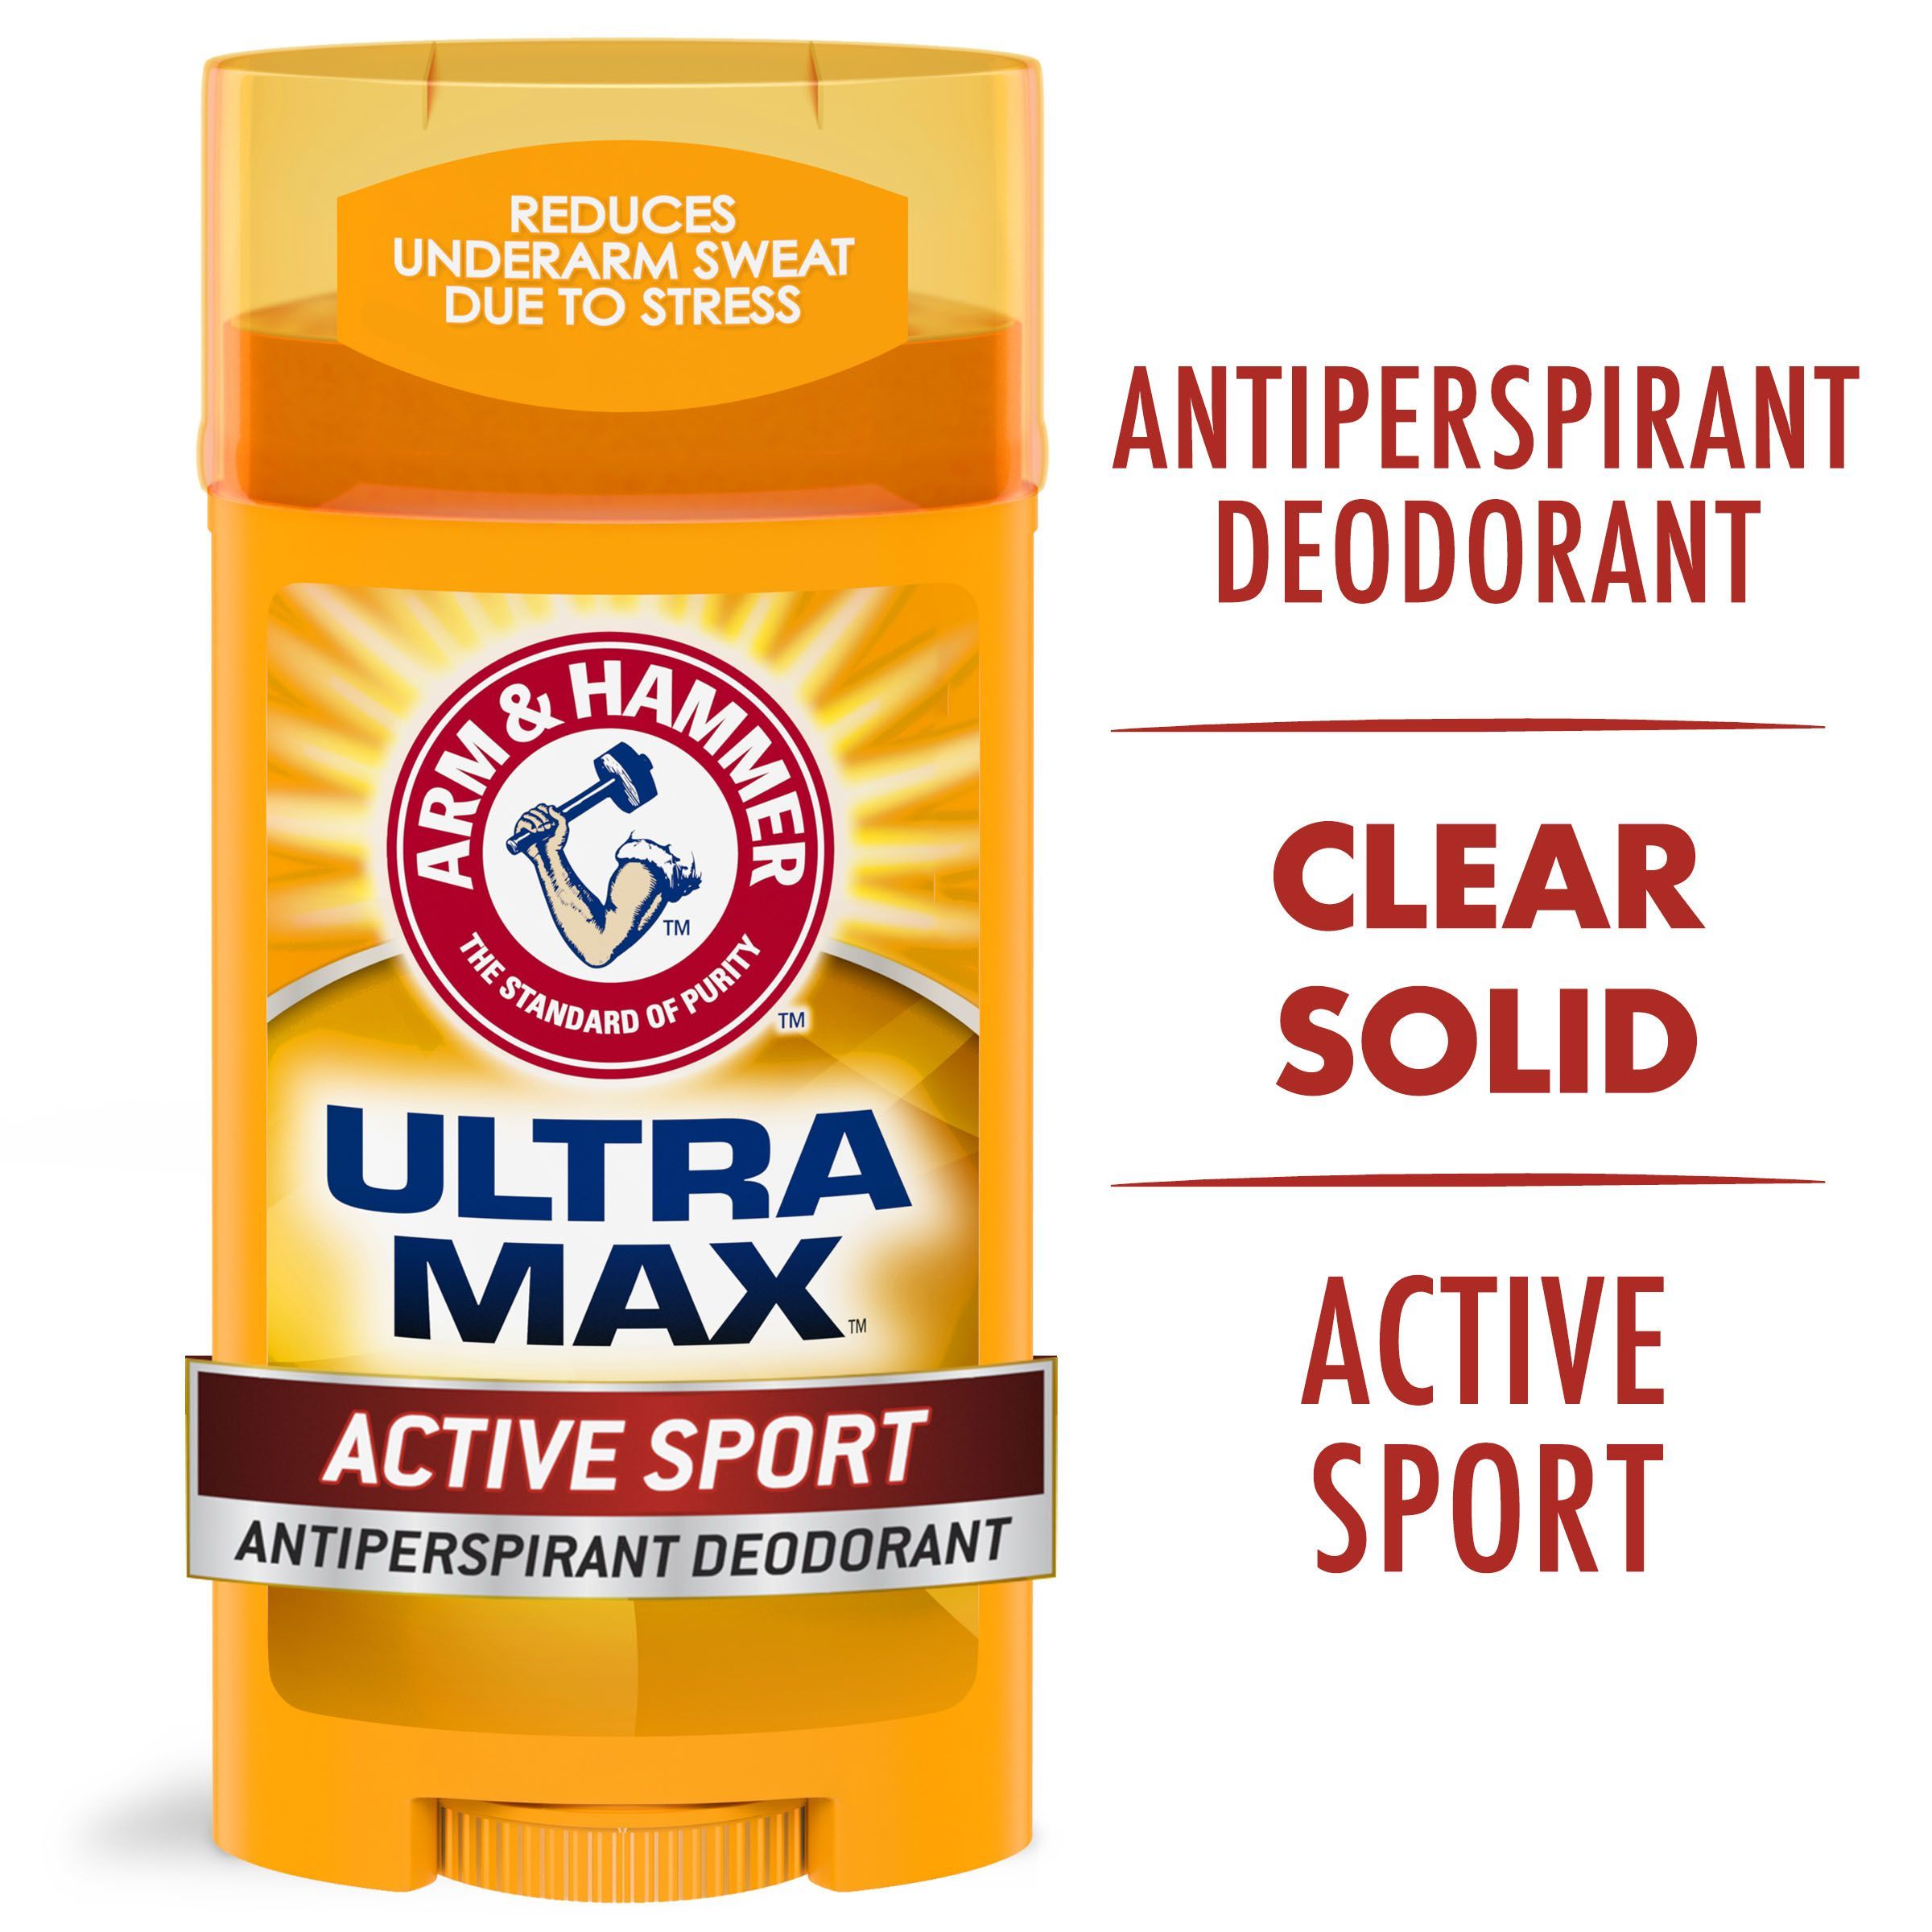 ARM & HAMMER ULTRA MAX Deodorant- Active Sport-  Solid Stick - 2.6oz - image 1 of 6